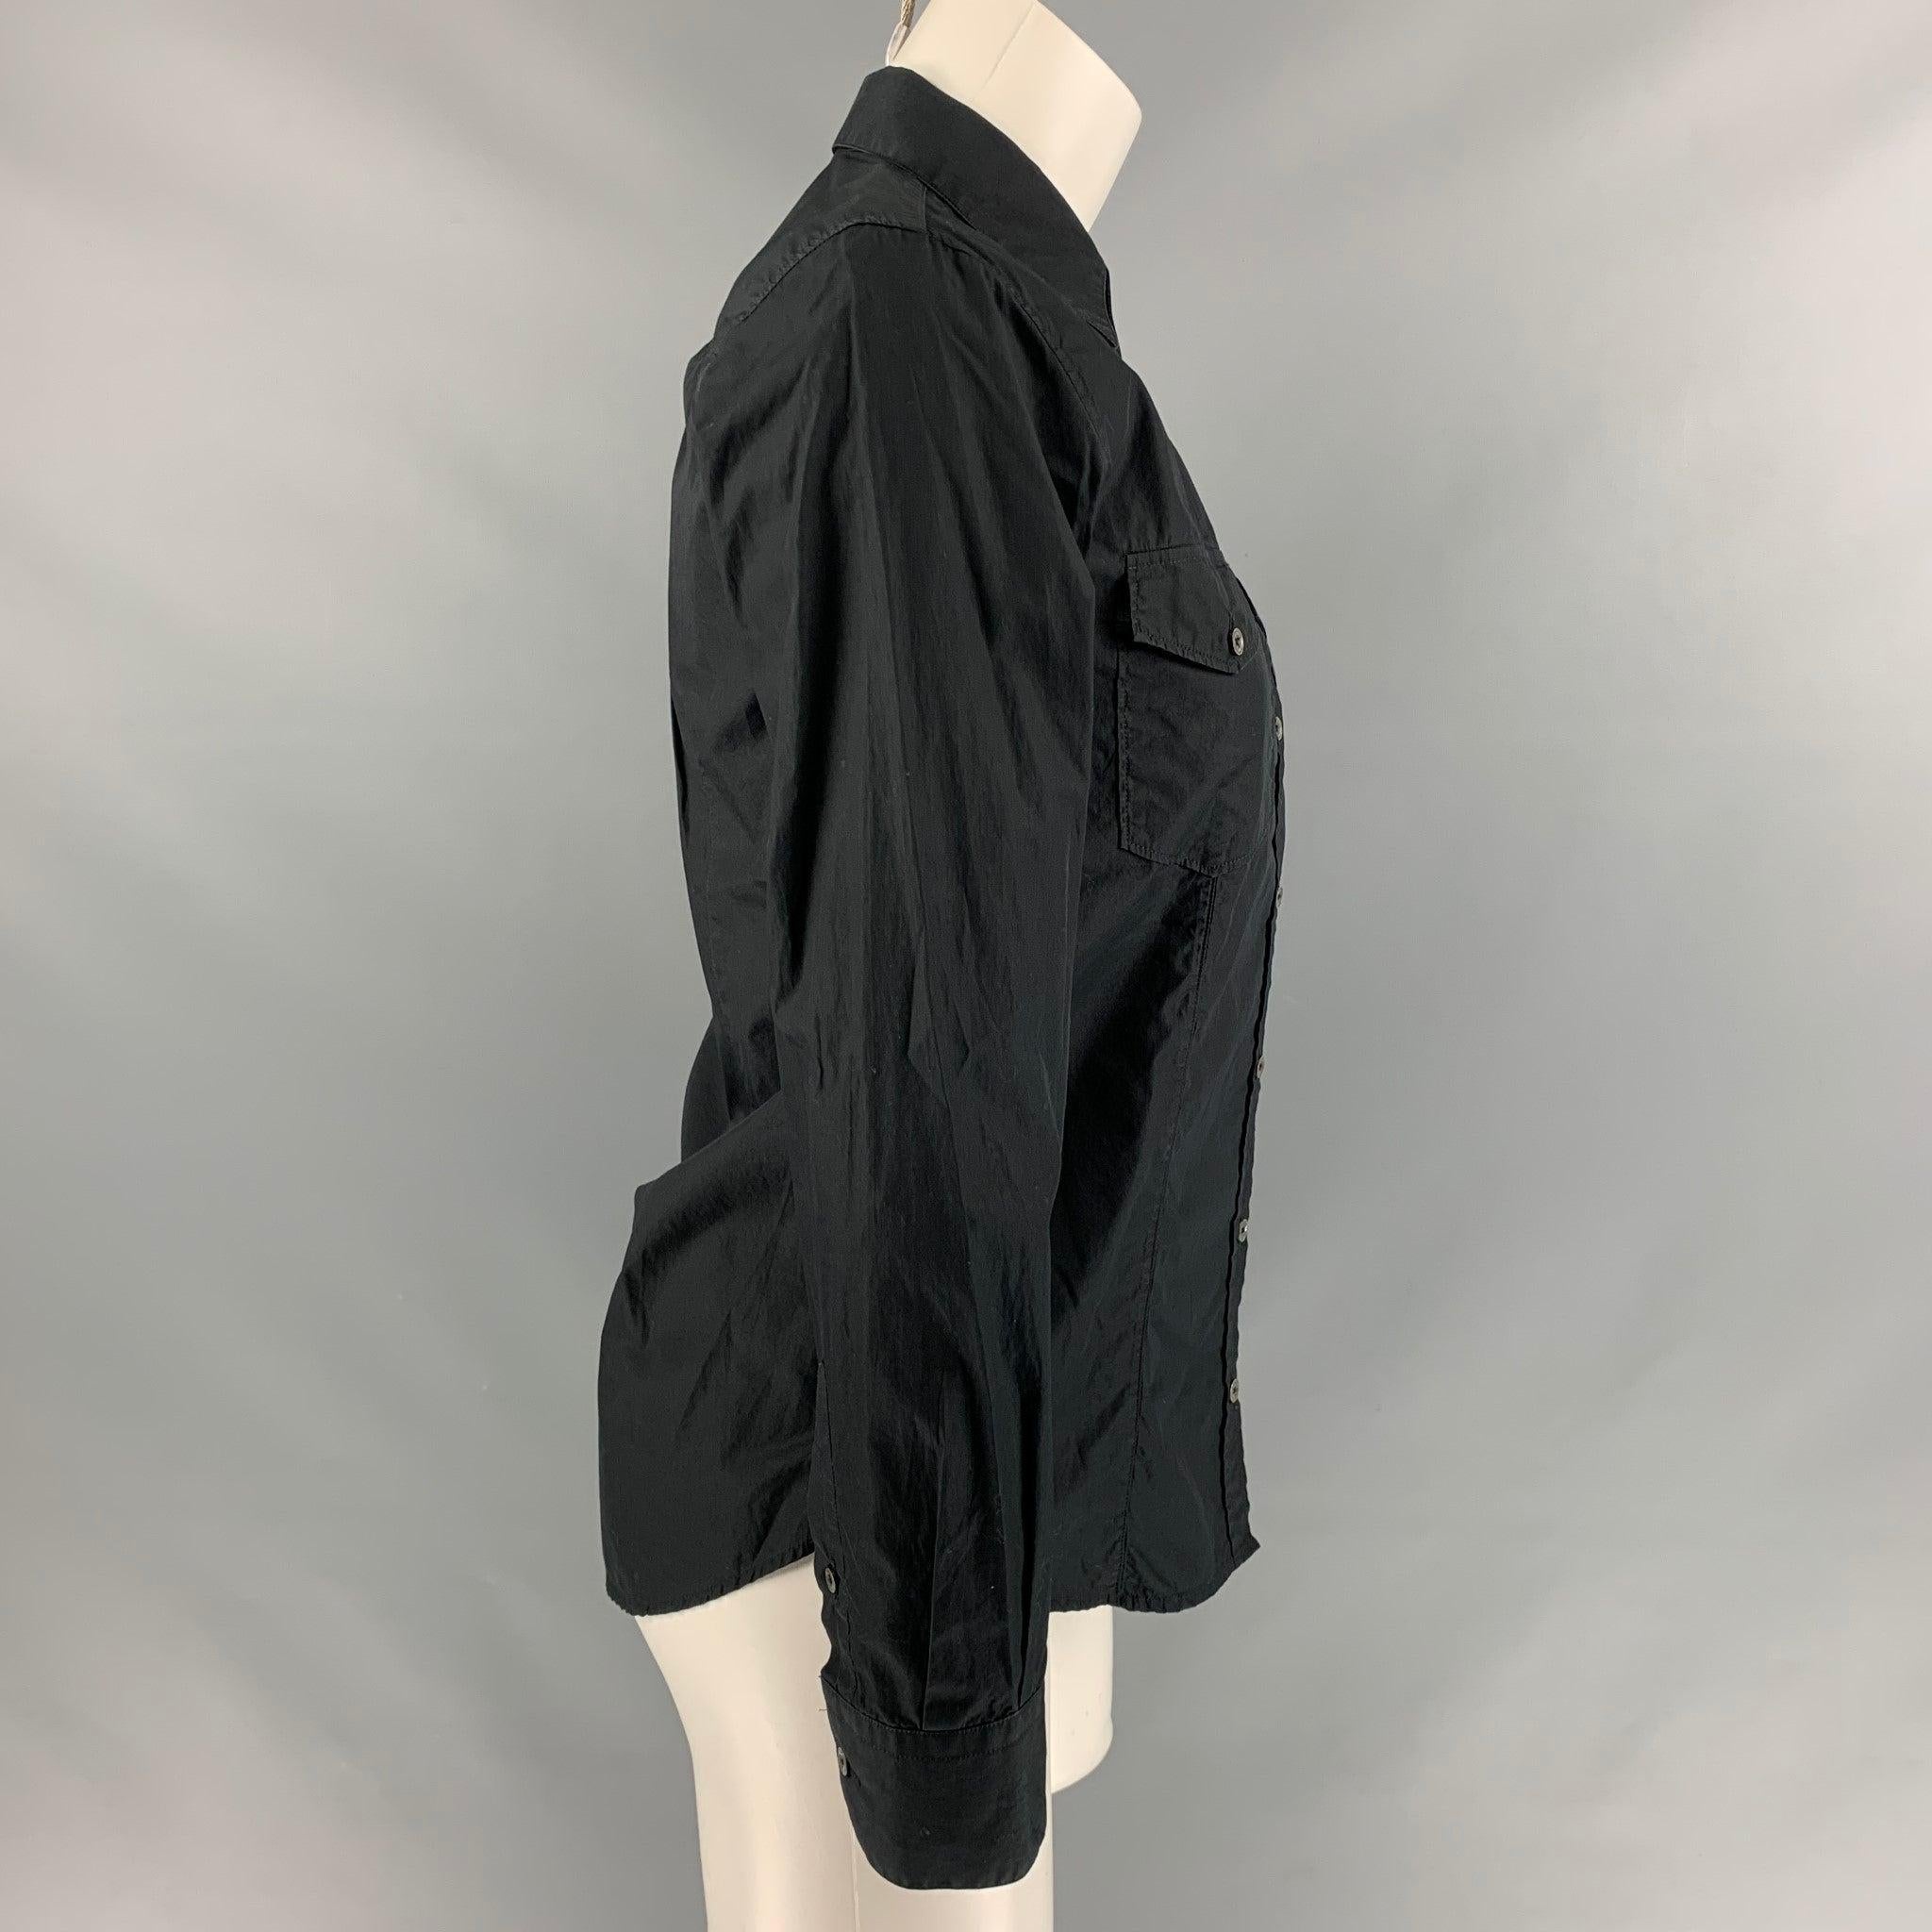 GOLDEN GOOSE long sleeve blouse comes in black cotton fabric featuring a straight collar, two patch pockets with flap at front, two gold stripe at side seam and a button up closure. Made in Italy.Excellent Pre-Owned Condition. 

Marked:   S